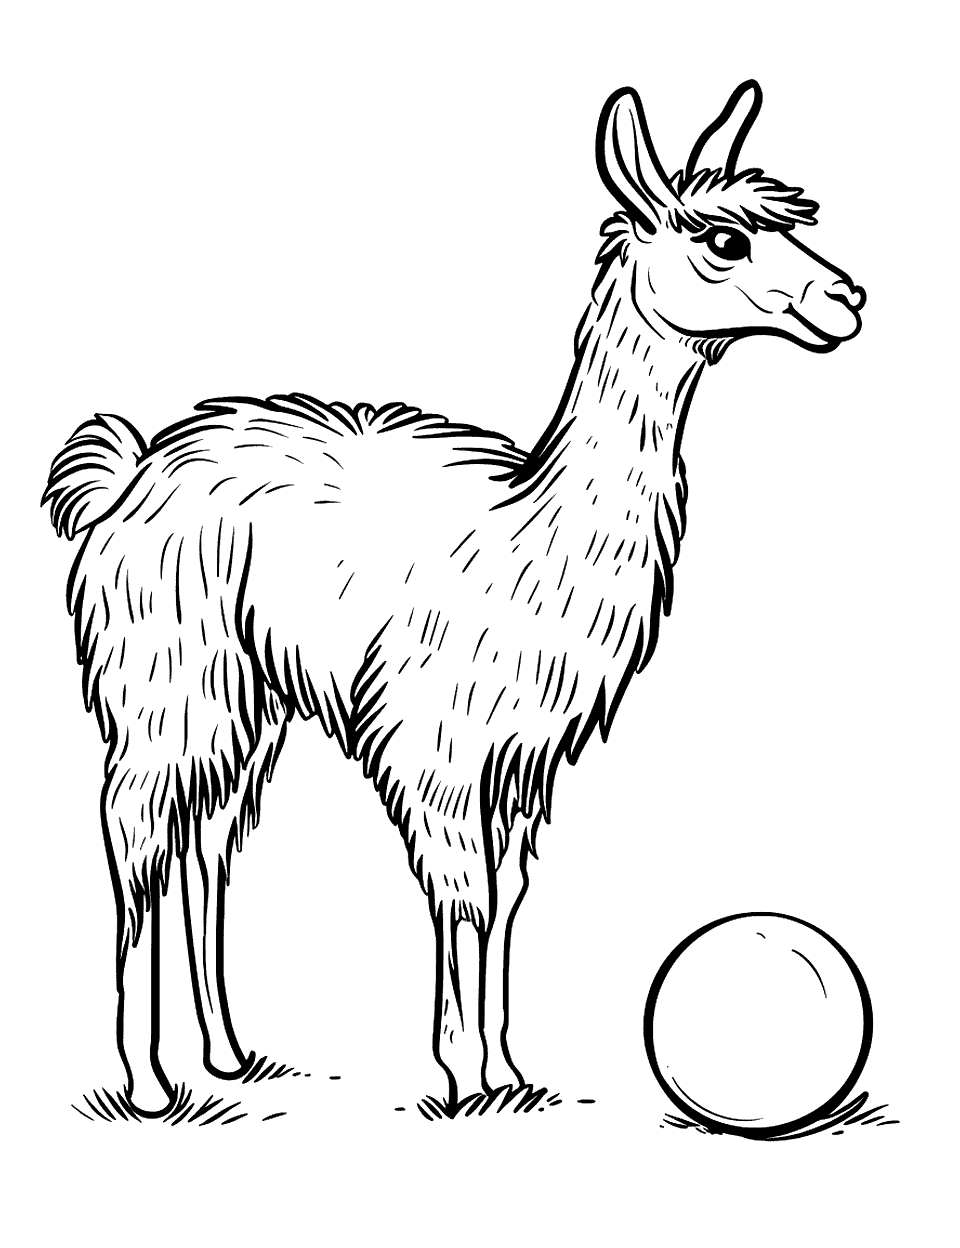 Llama Playing with a Ball Coloring Page - A playful llama interacting with a bright ball.